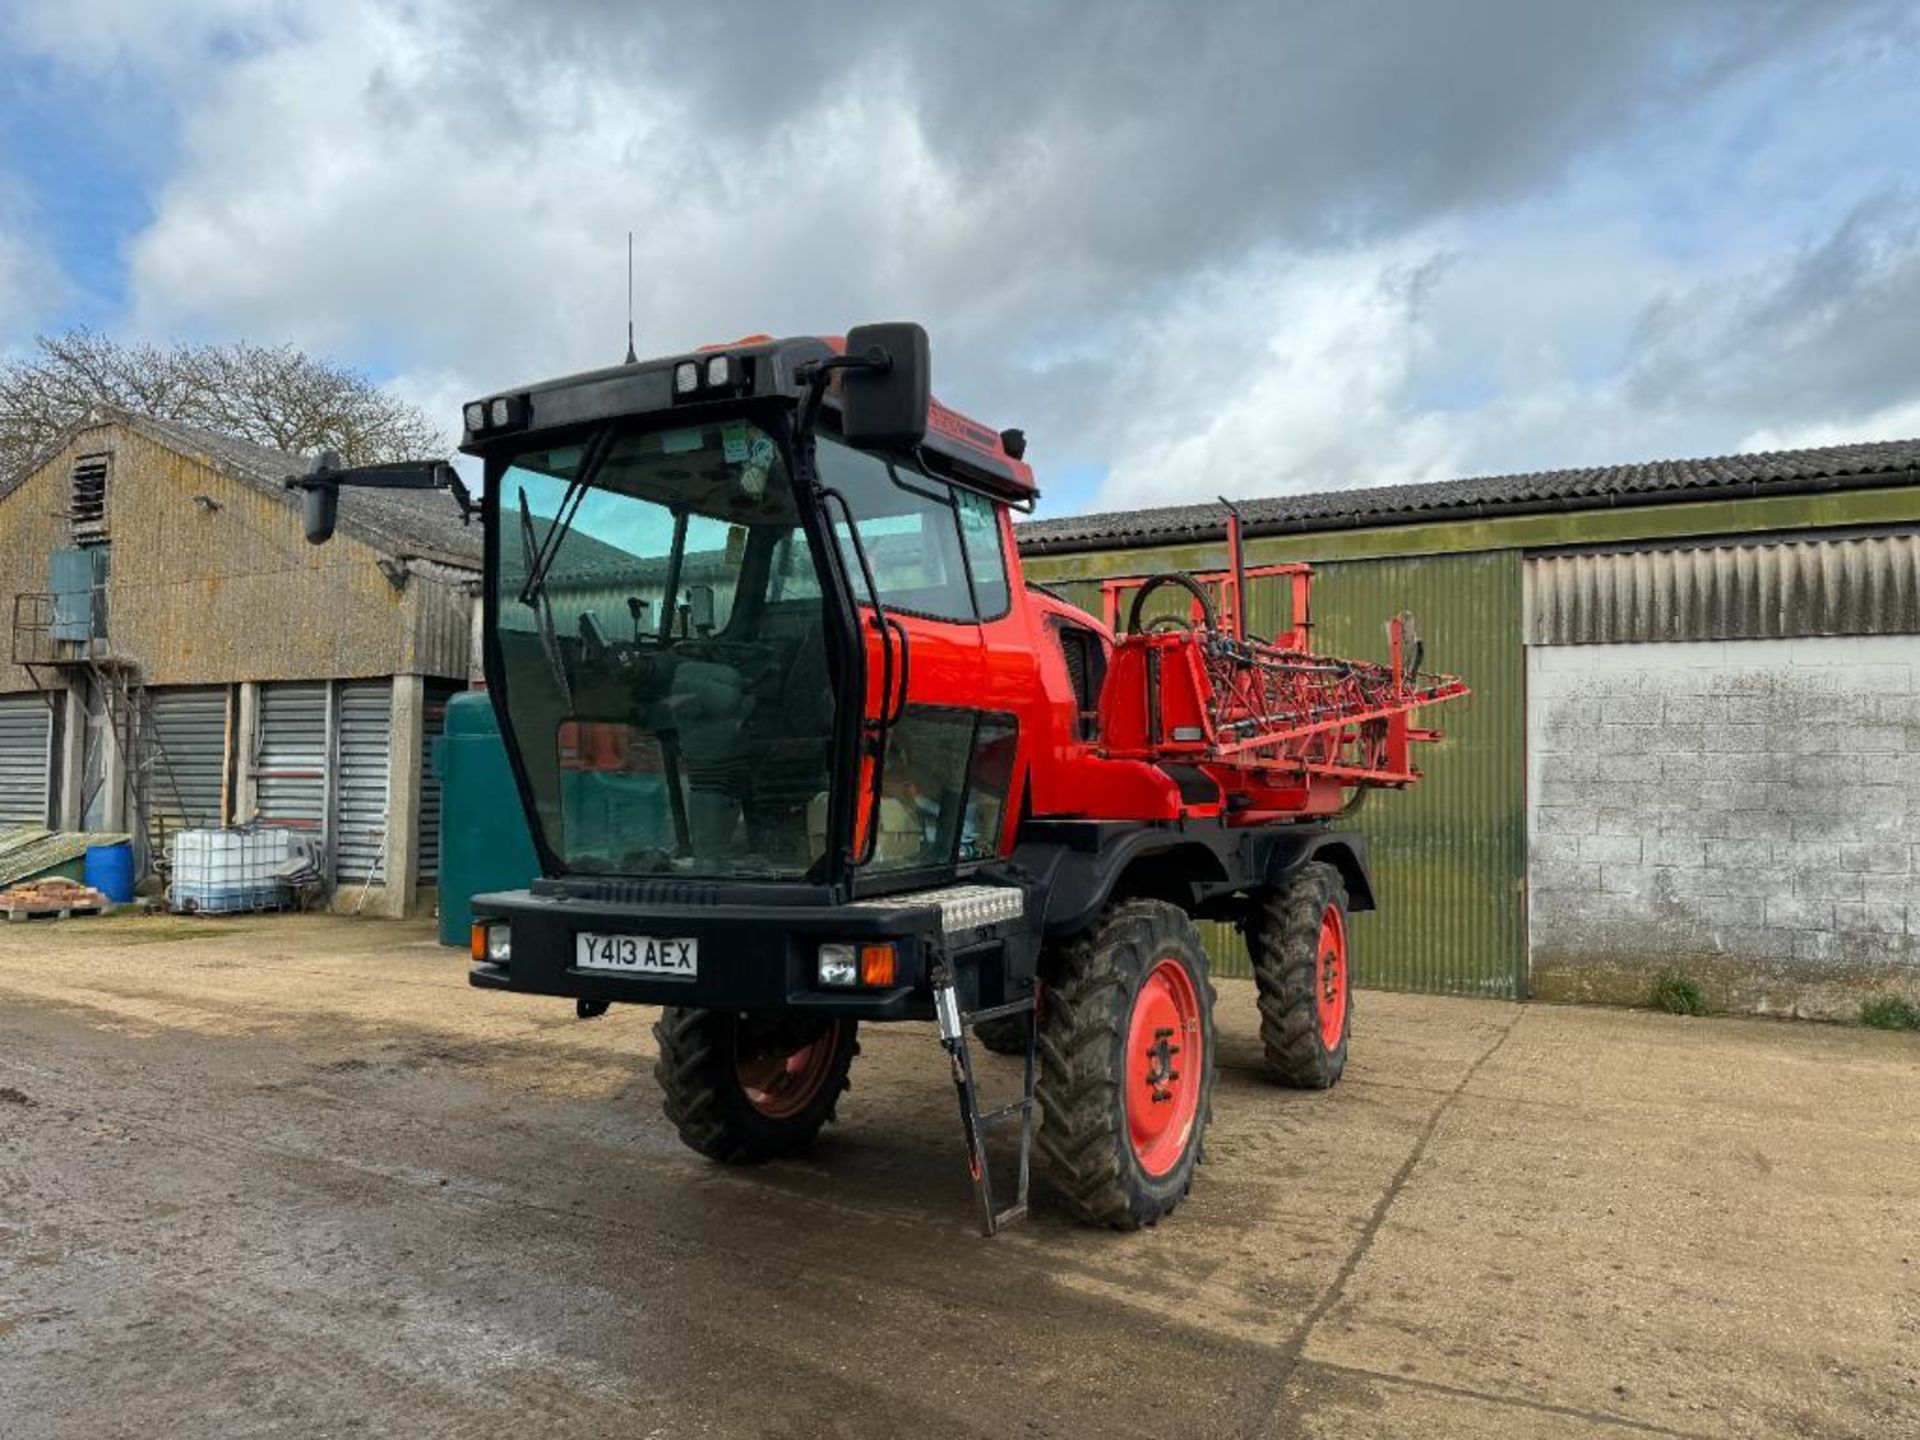 2001 SAM 3000M Lowline self-propelled 24m sprayer with 3000l tank, single line on 12.4R32 wheels and